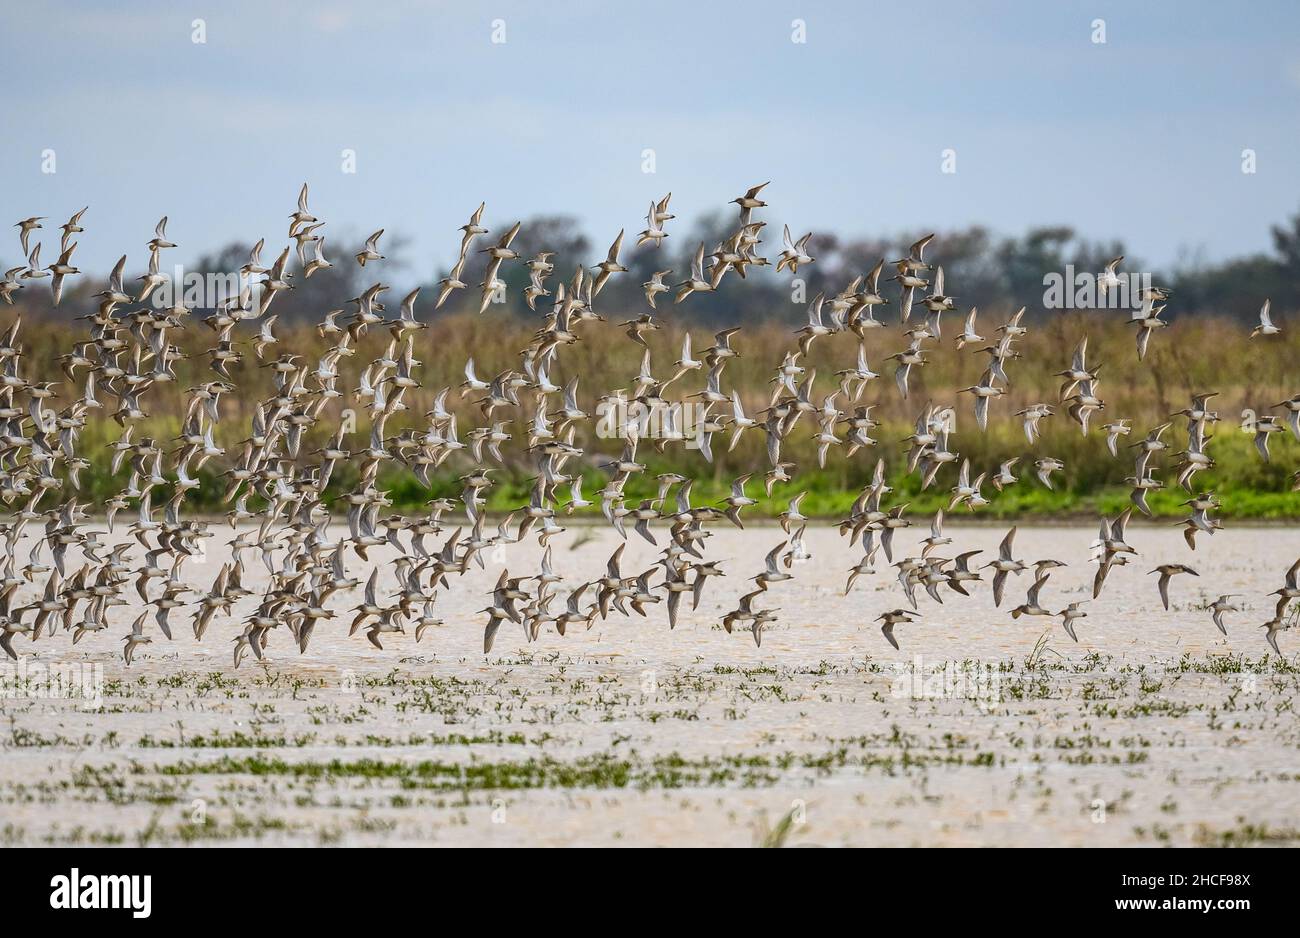 Flock of Long-billed Dowitchers (Limnodromus scolopaceus) flying over a lake. Houston, Texas, USA. Stock Photo